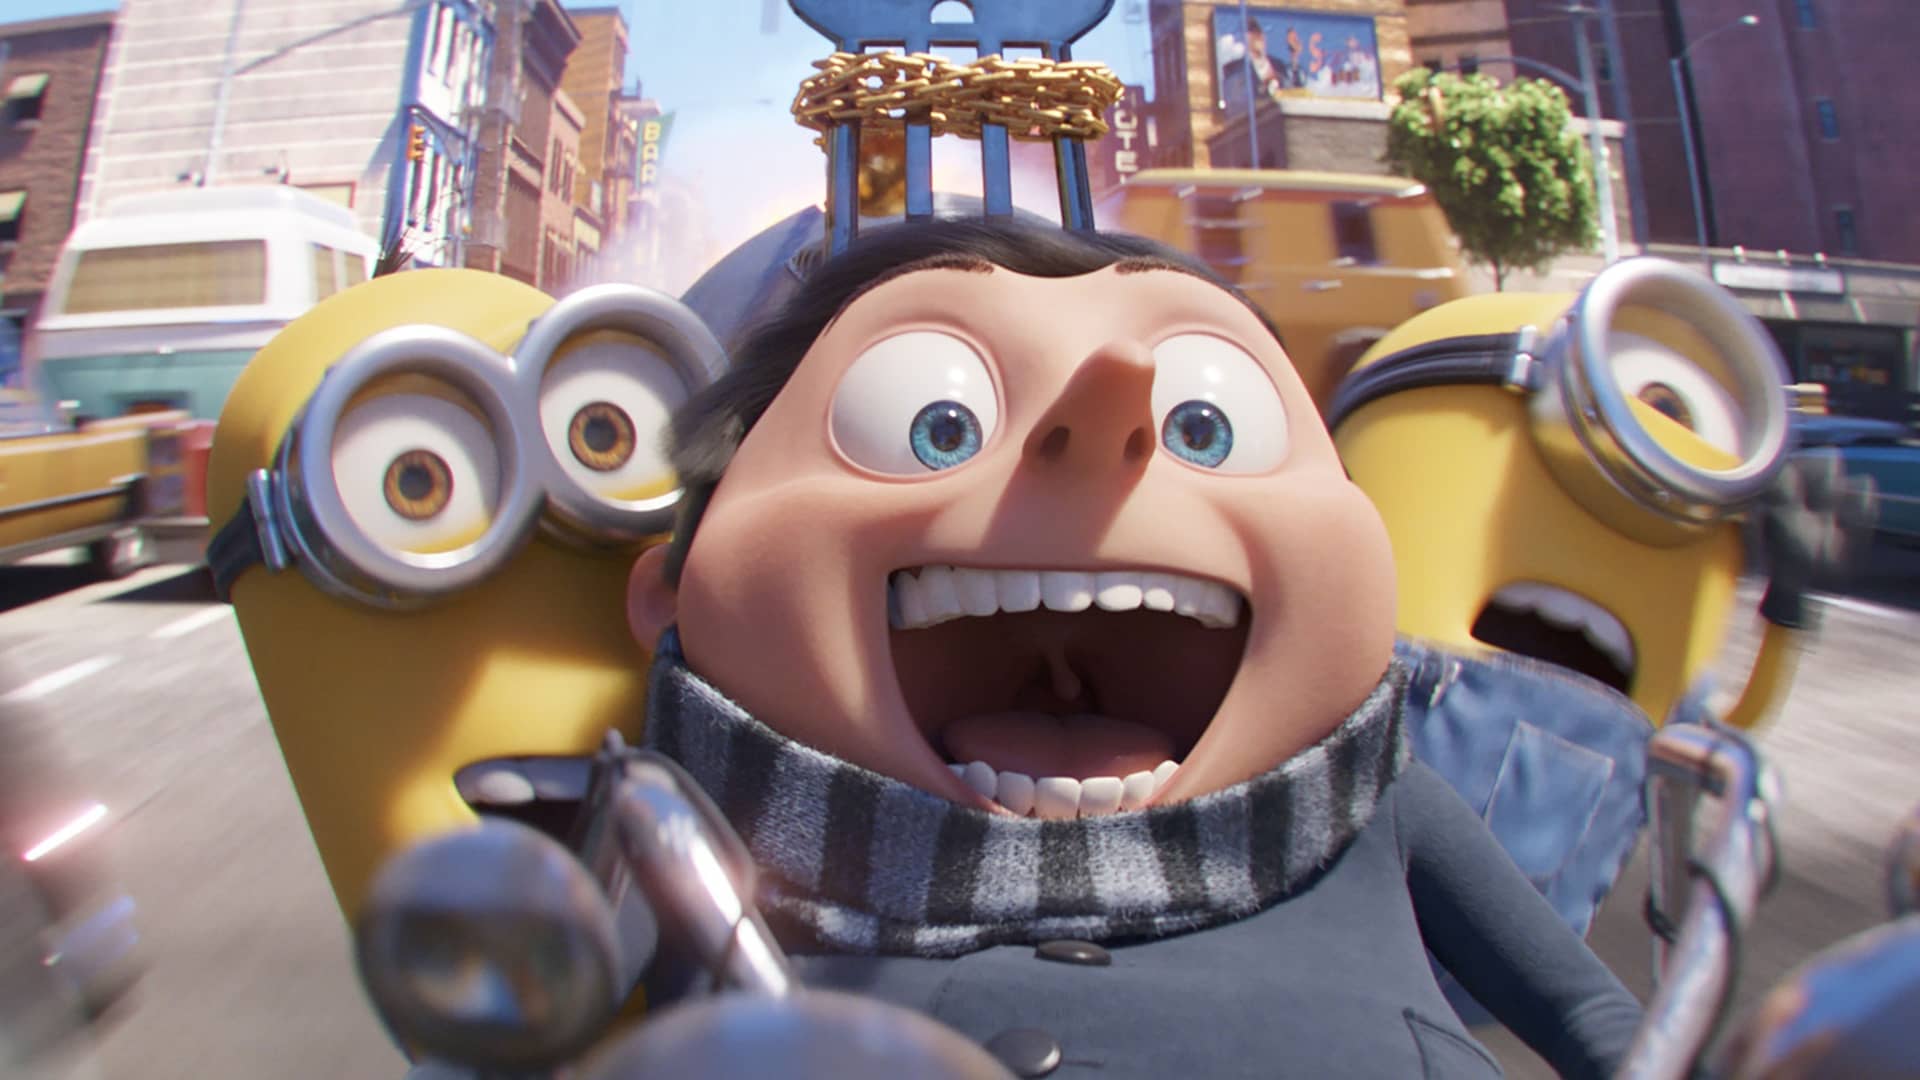 Rise of Gru domestic box office opening tops $108 million